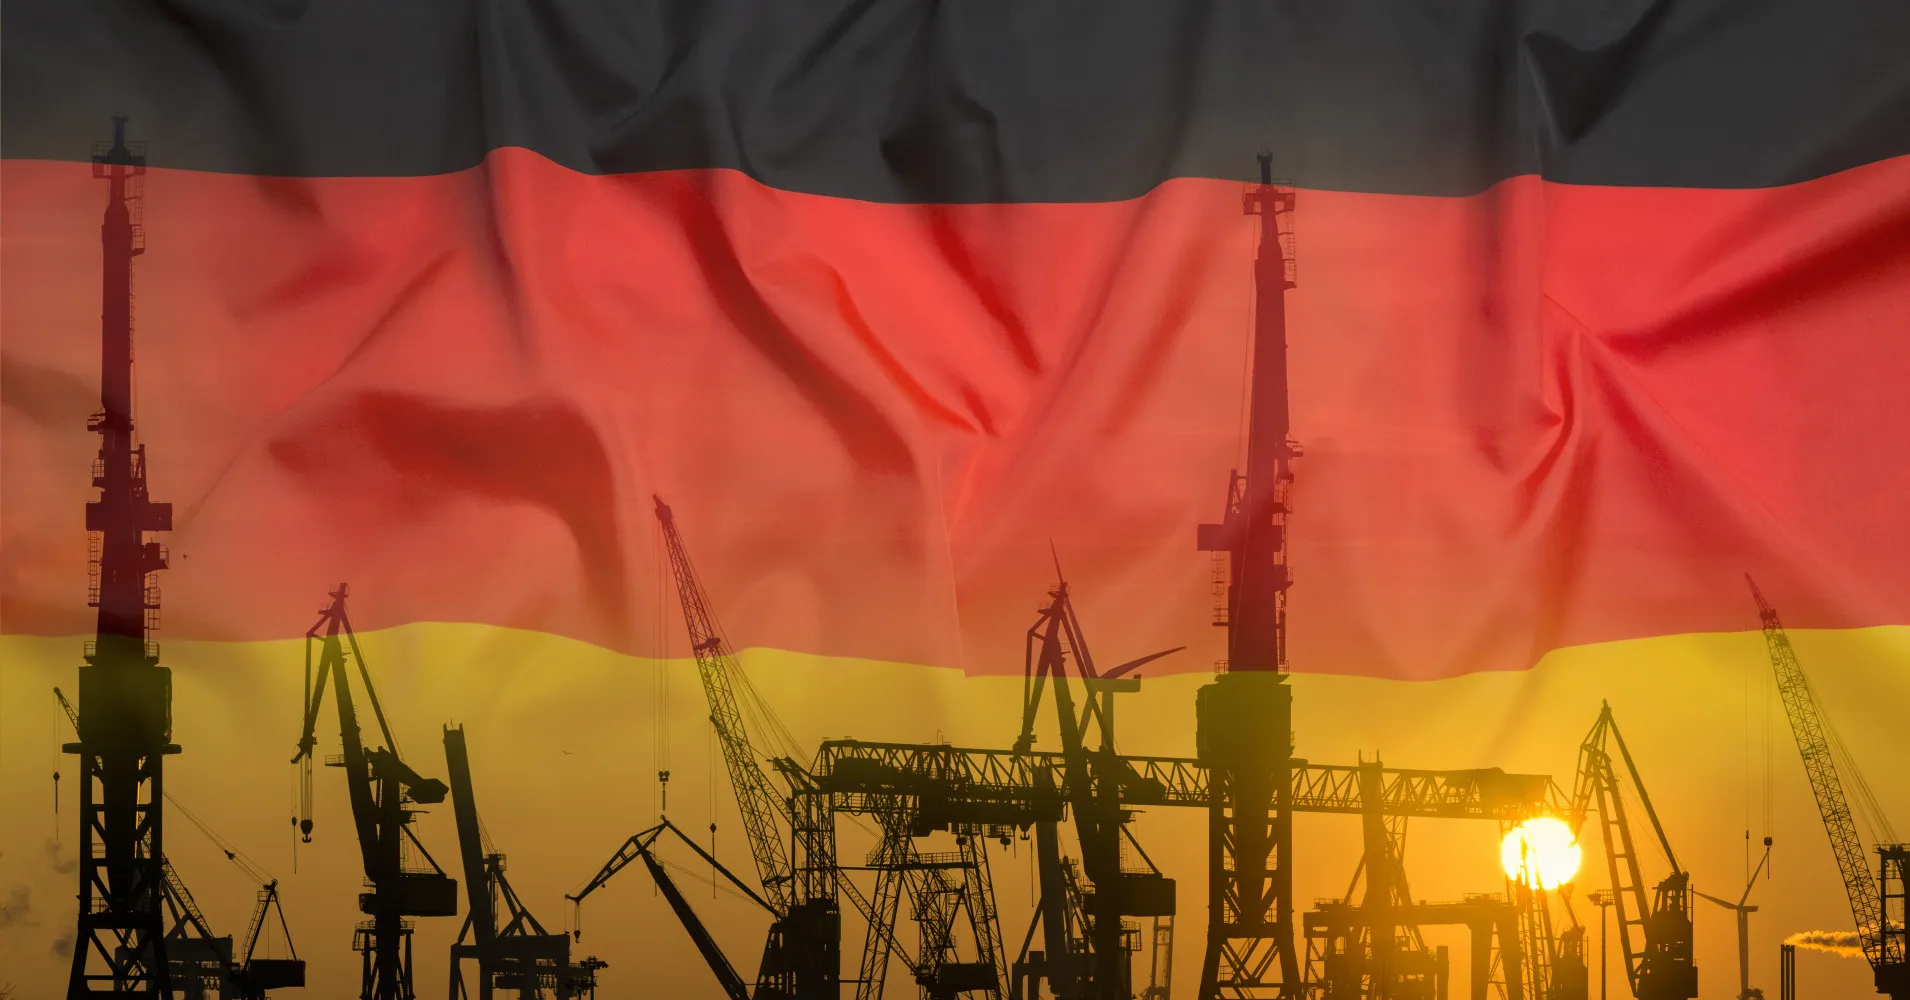 German Industry in Crisis: Companies Moving Production Away Due to High Costs